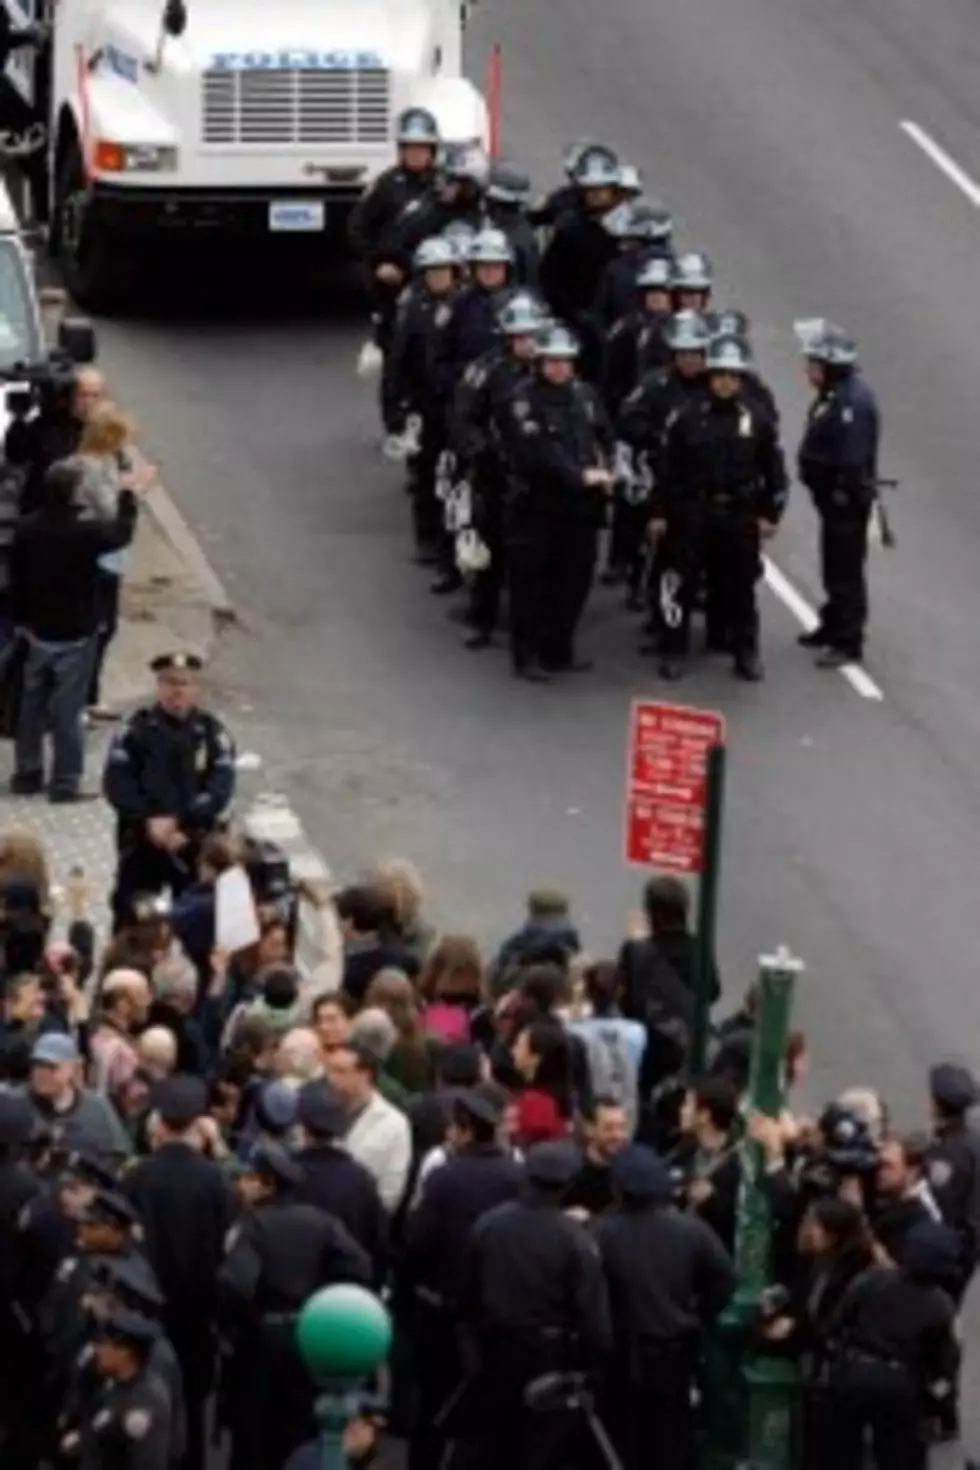 Occupy WS &#8216;Stockpiling Weapons&#8217; According to NYPD